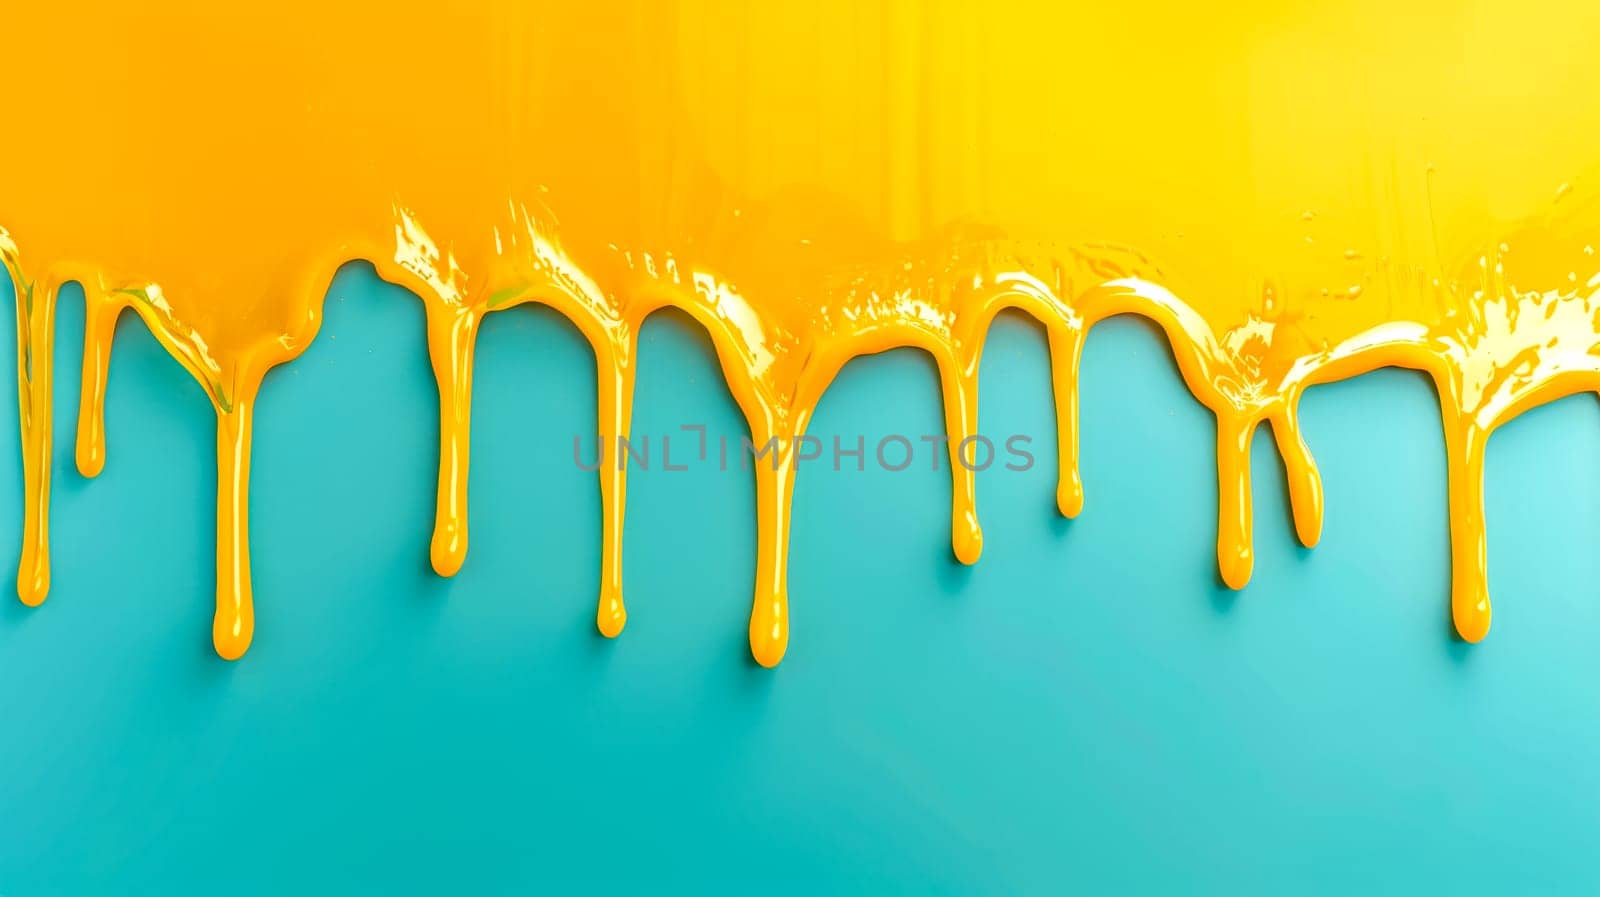 High-contrast image of orange paint dripping against a bright blue backdrop